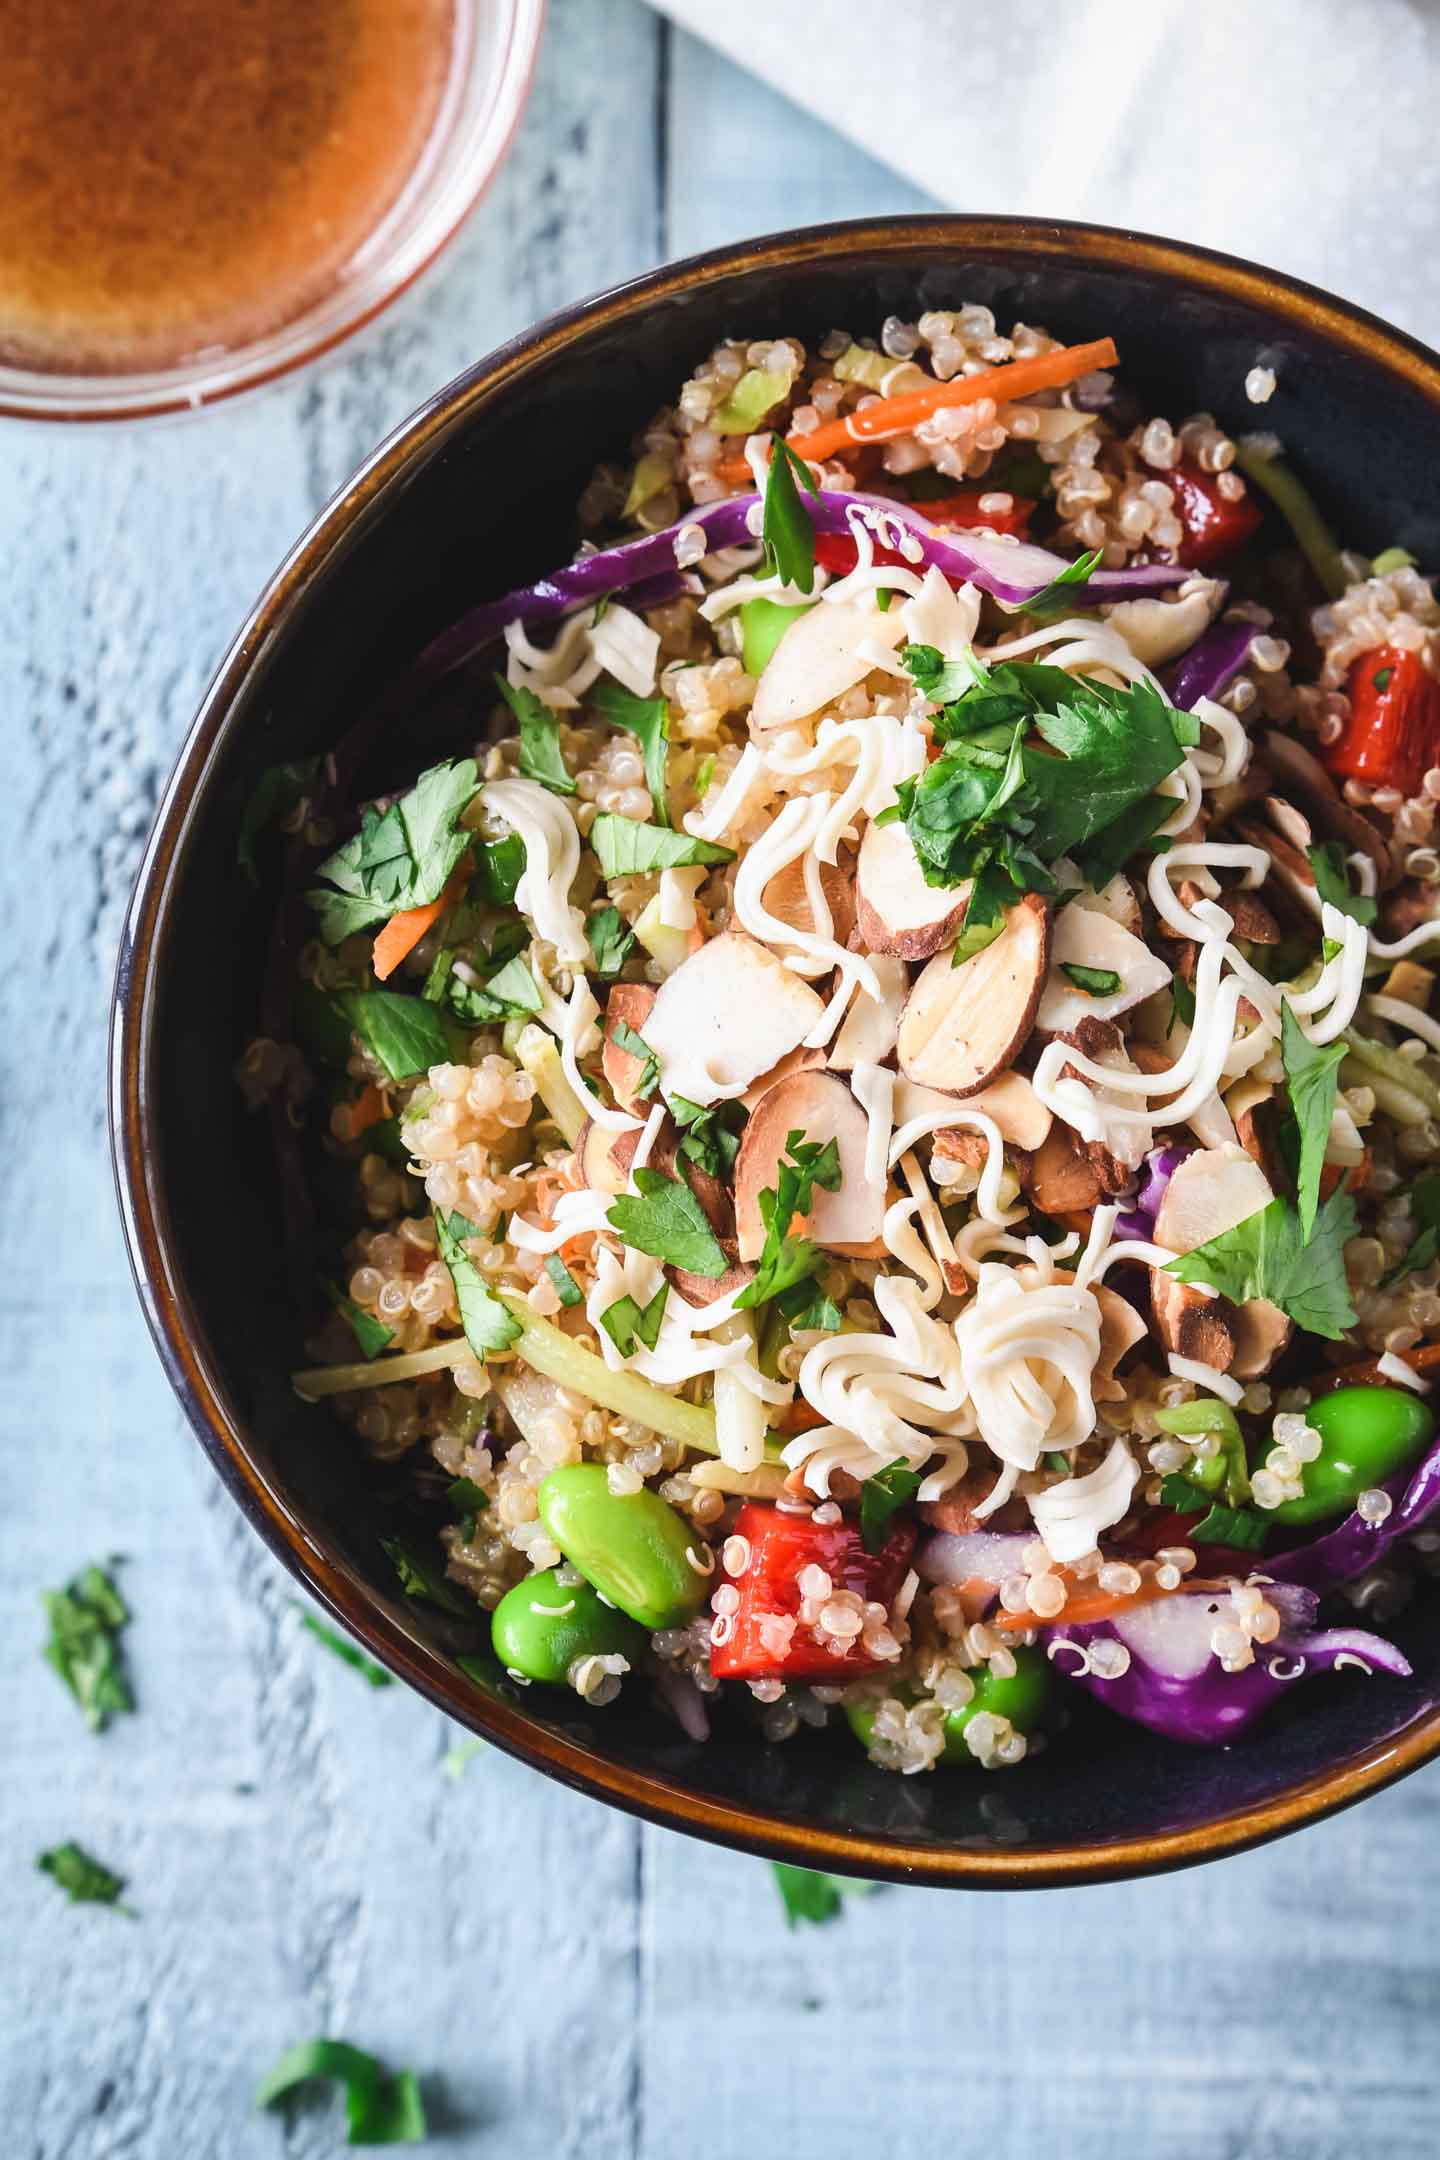 Asian quinoa salad in a dark bowl with dressing on the side